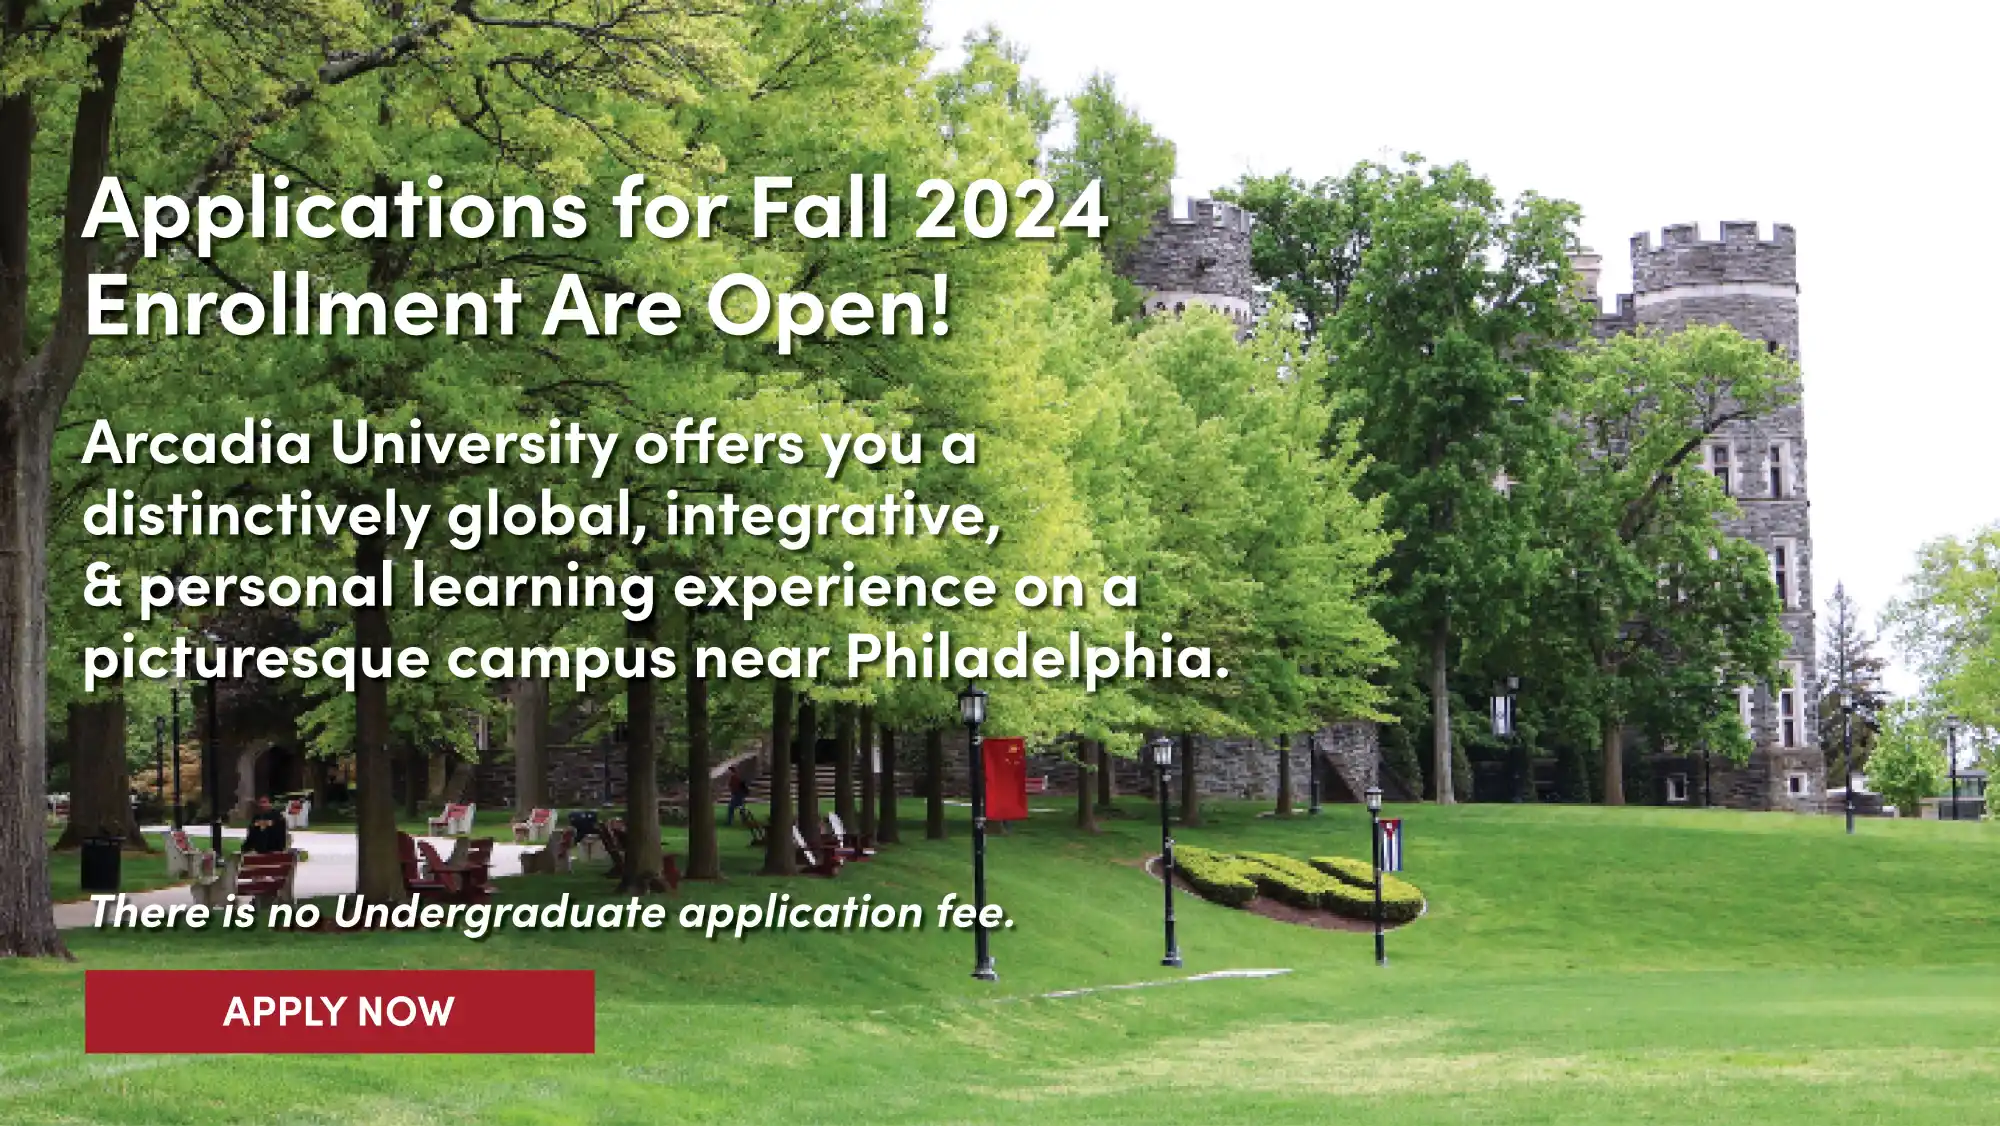 A banner saying that applications for Fall 2024 enrollment are open for undergraduate students and there is no fee.